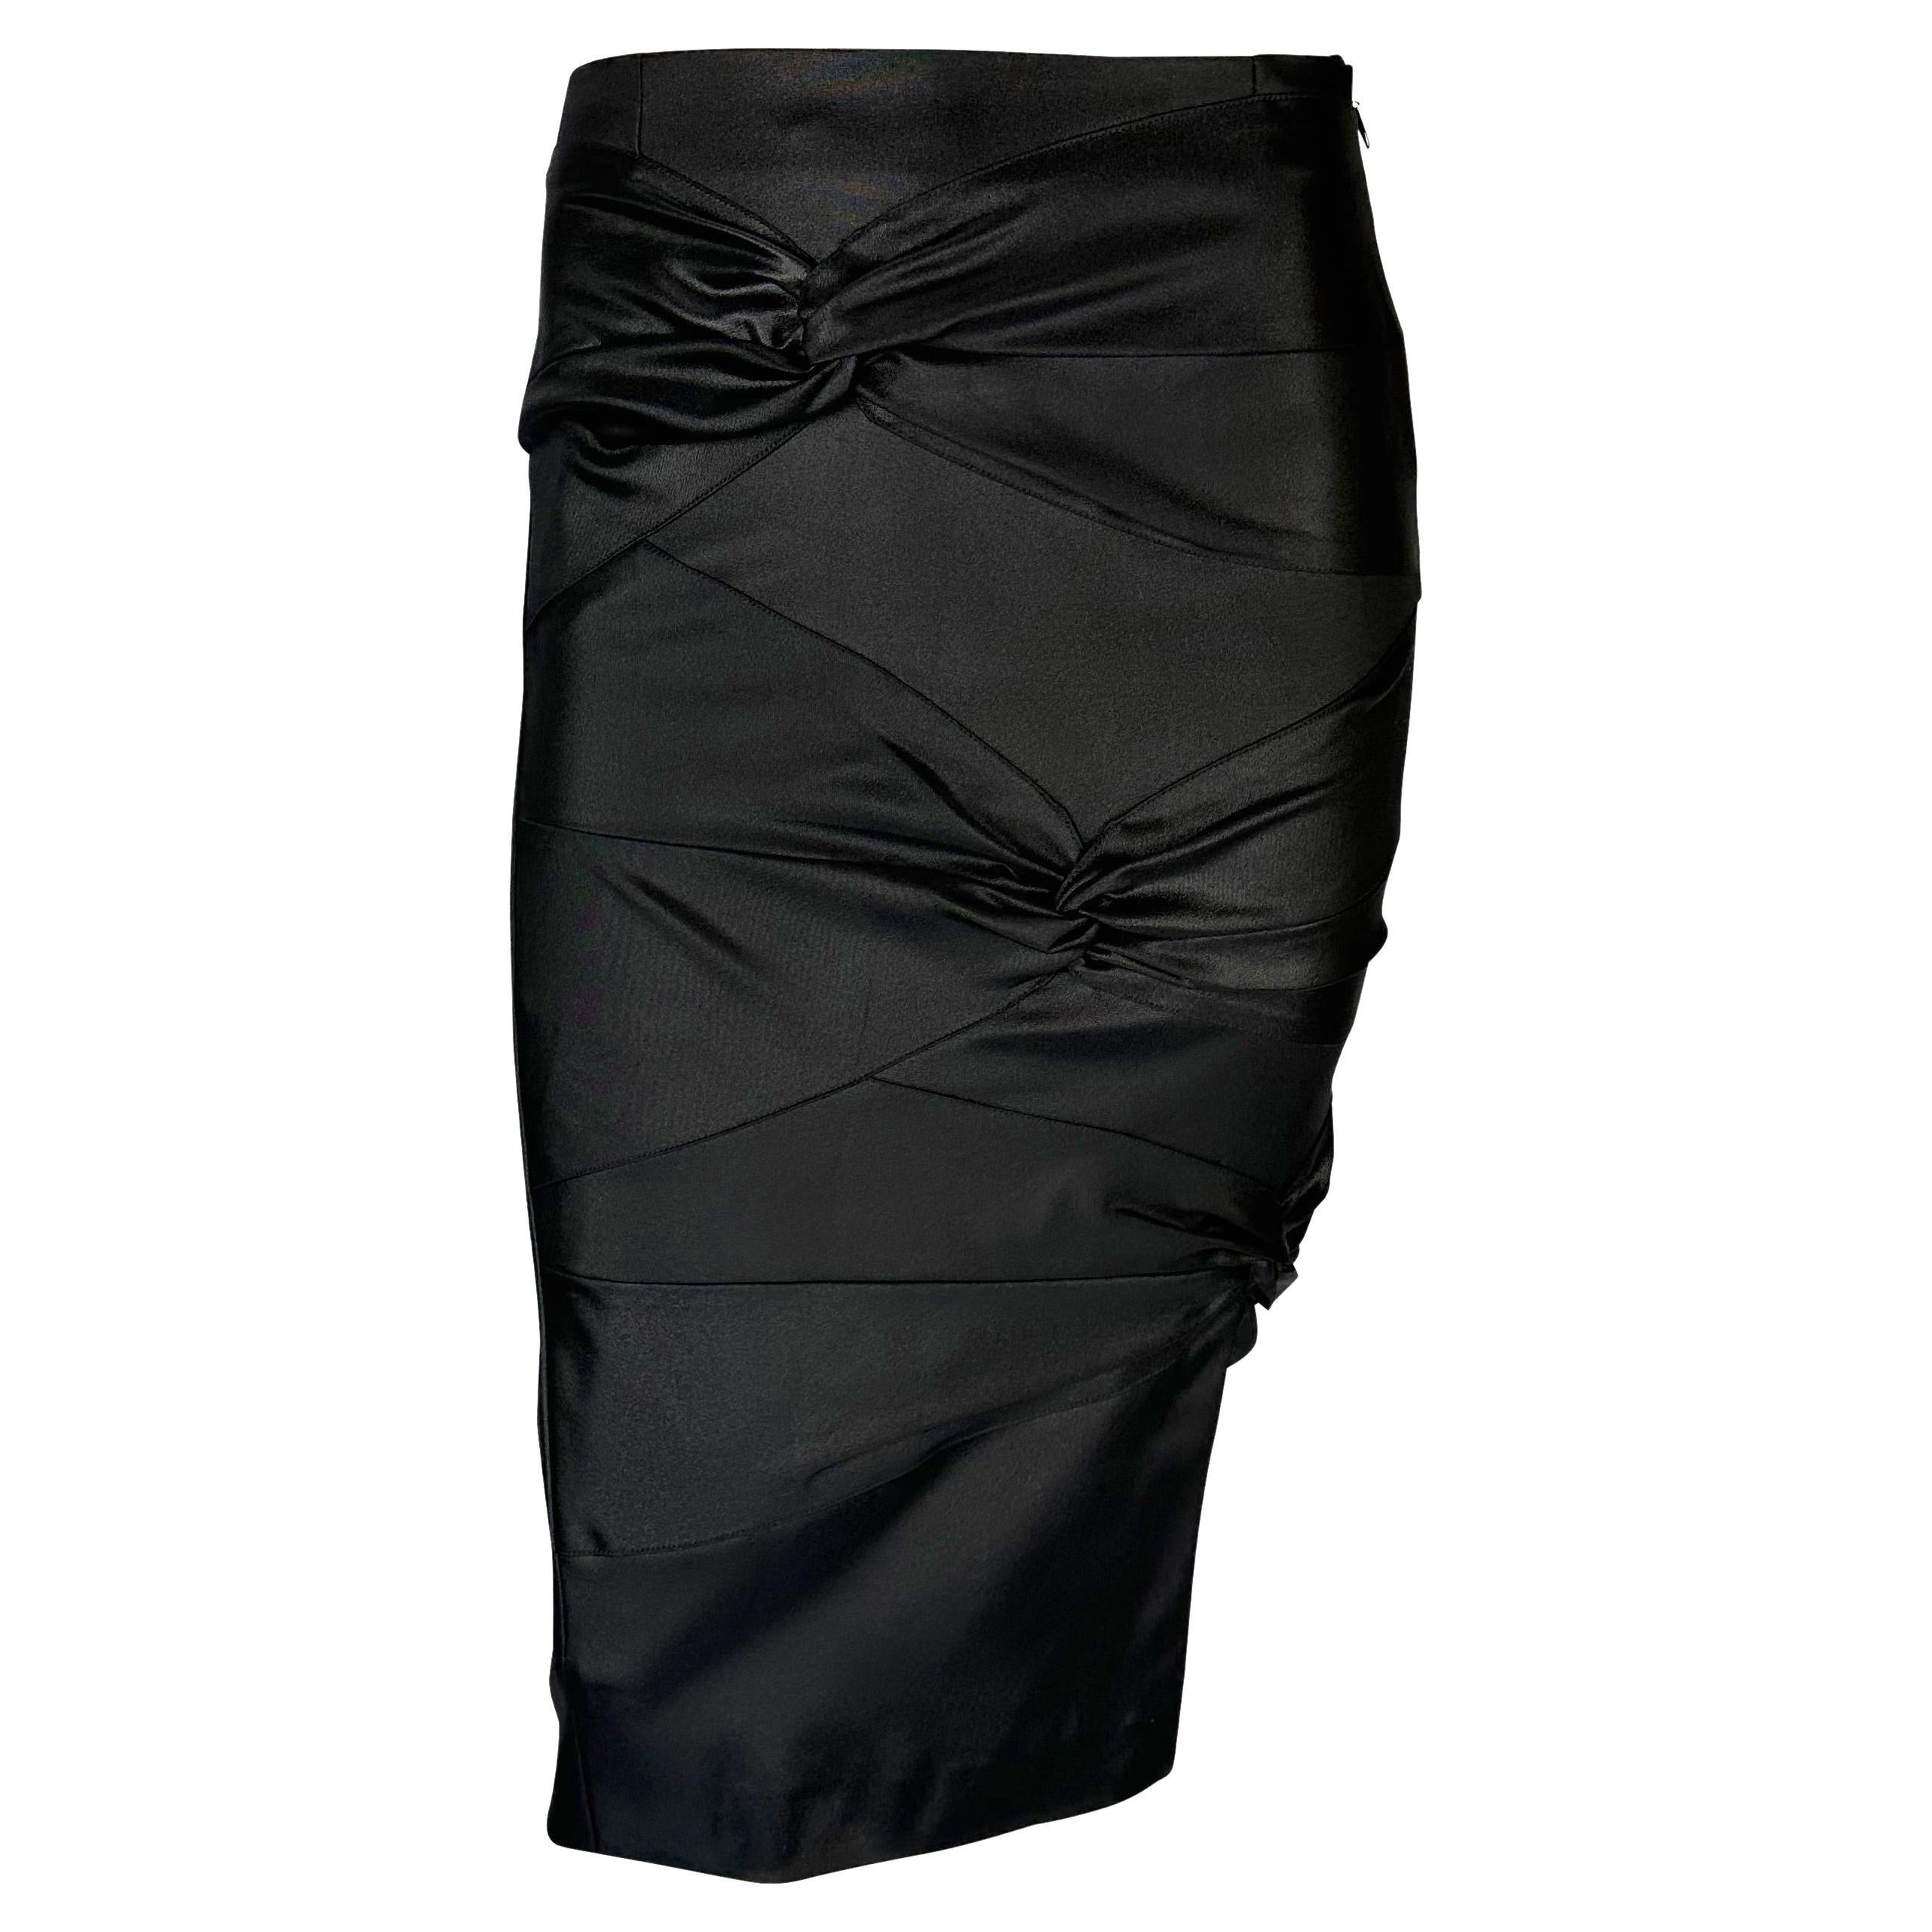 F/W 2003 Christian Dior by John Galliano Tie Accent Bodycon Stretch Skirt For Sale